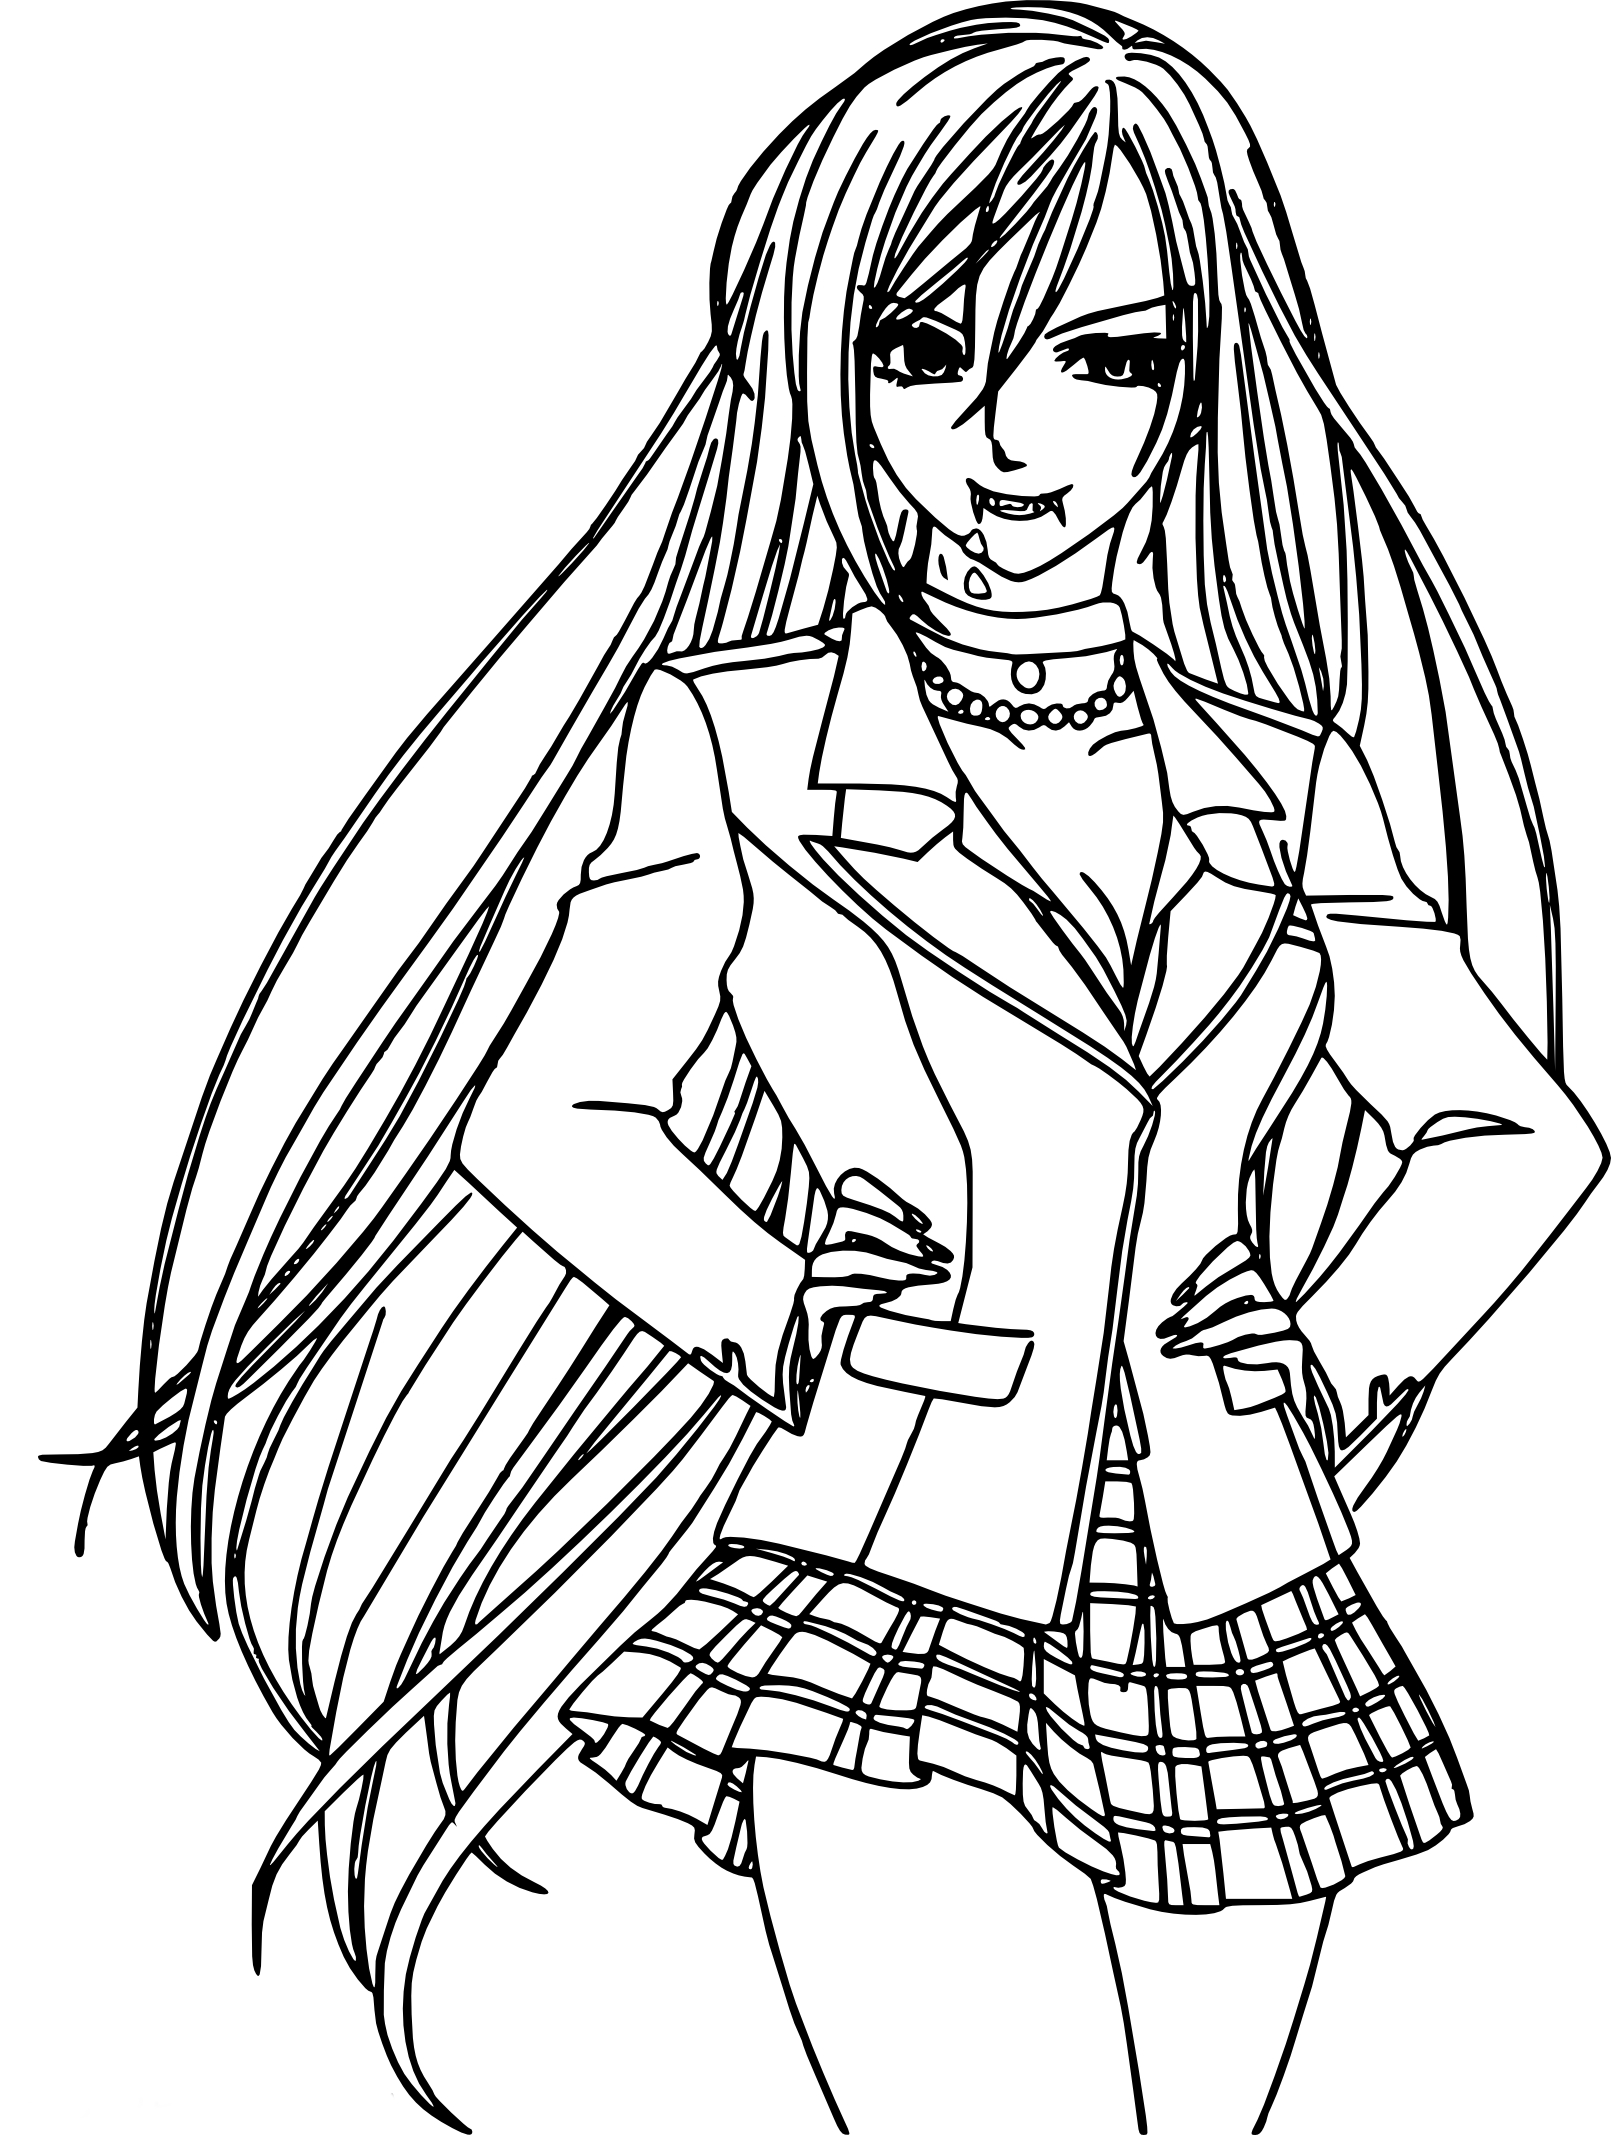 Vampire Girl coloring page